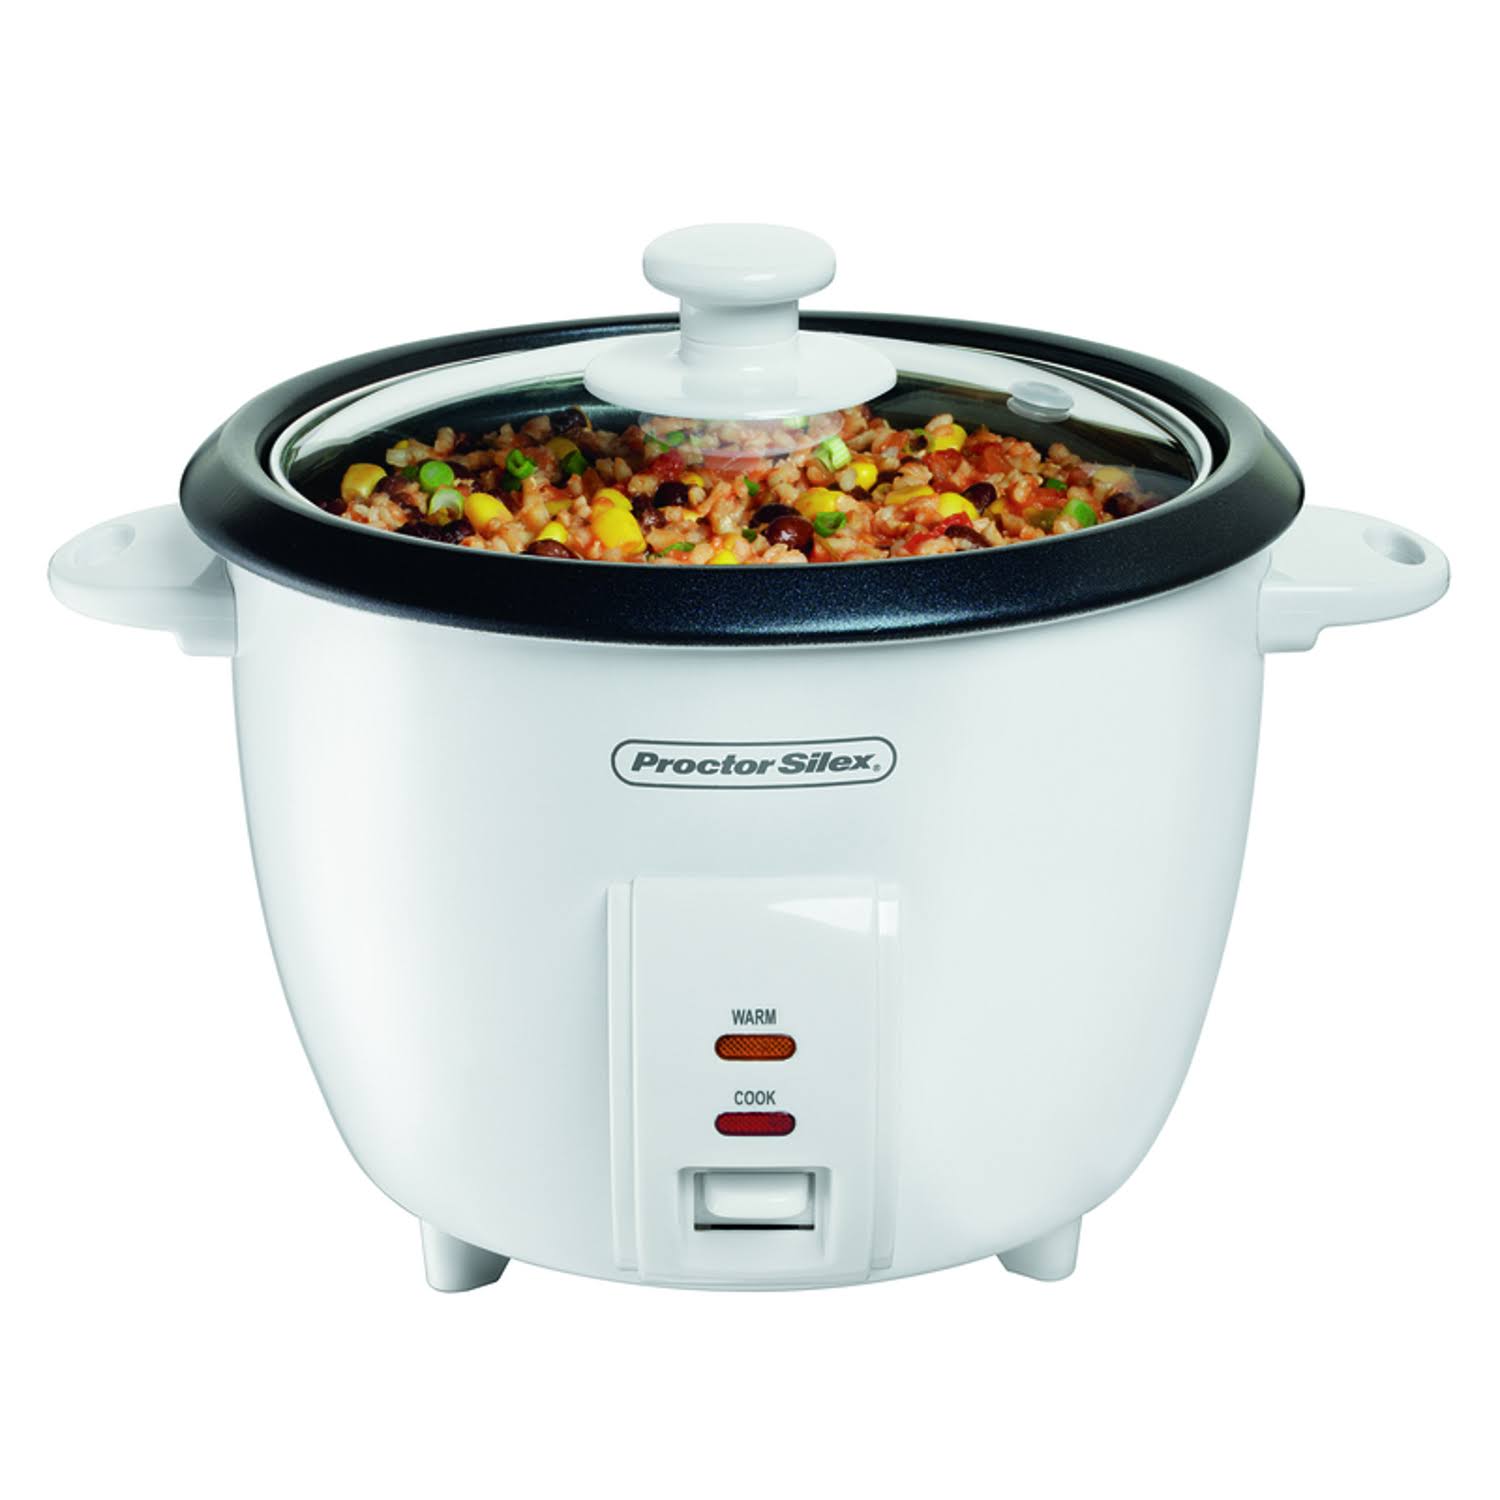 Proctor Silex 10-Cup Rice Cooker - White